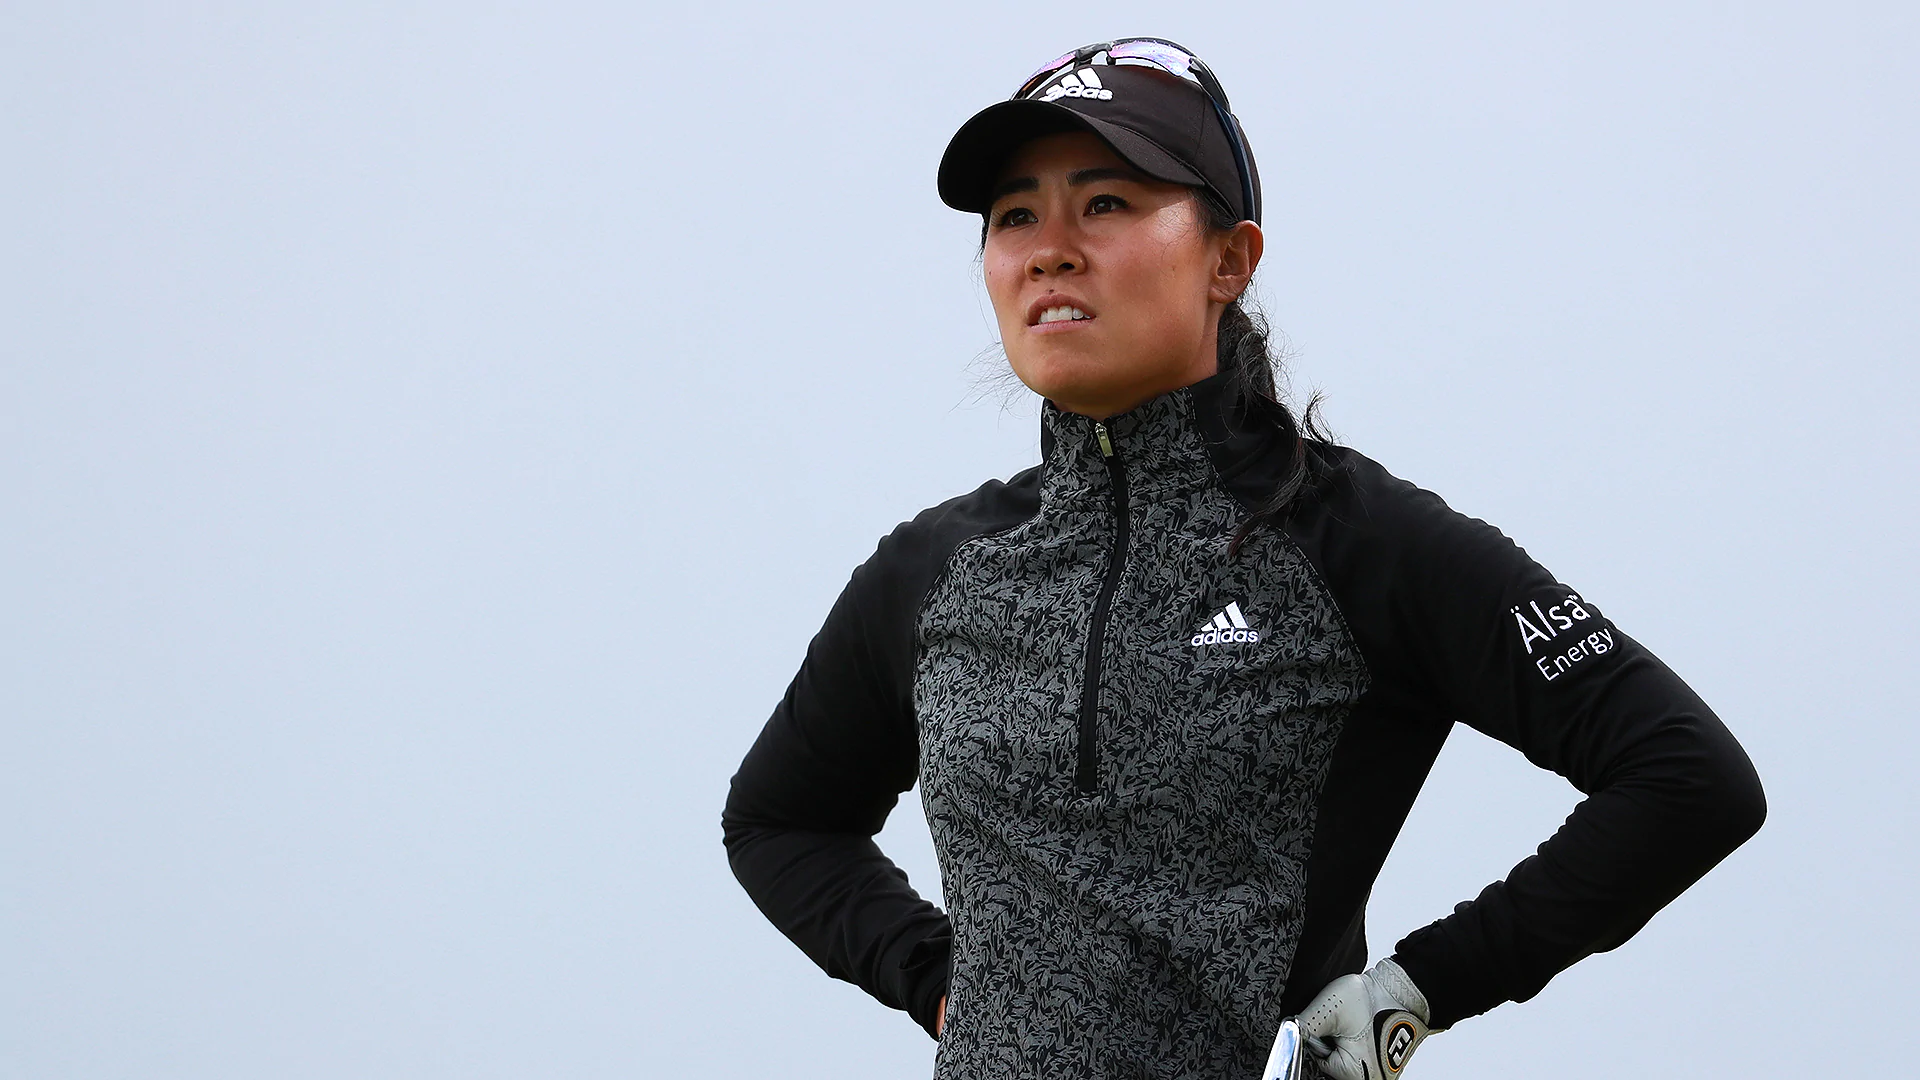 'Still on Cloud 9,' Kang not sure about Kingsbarns